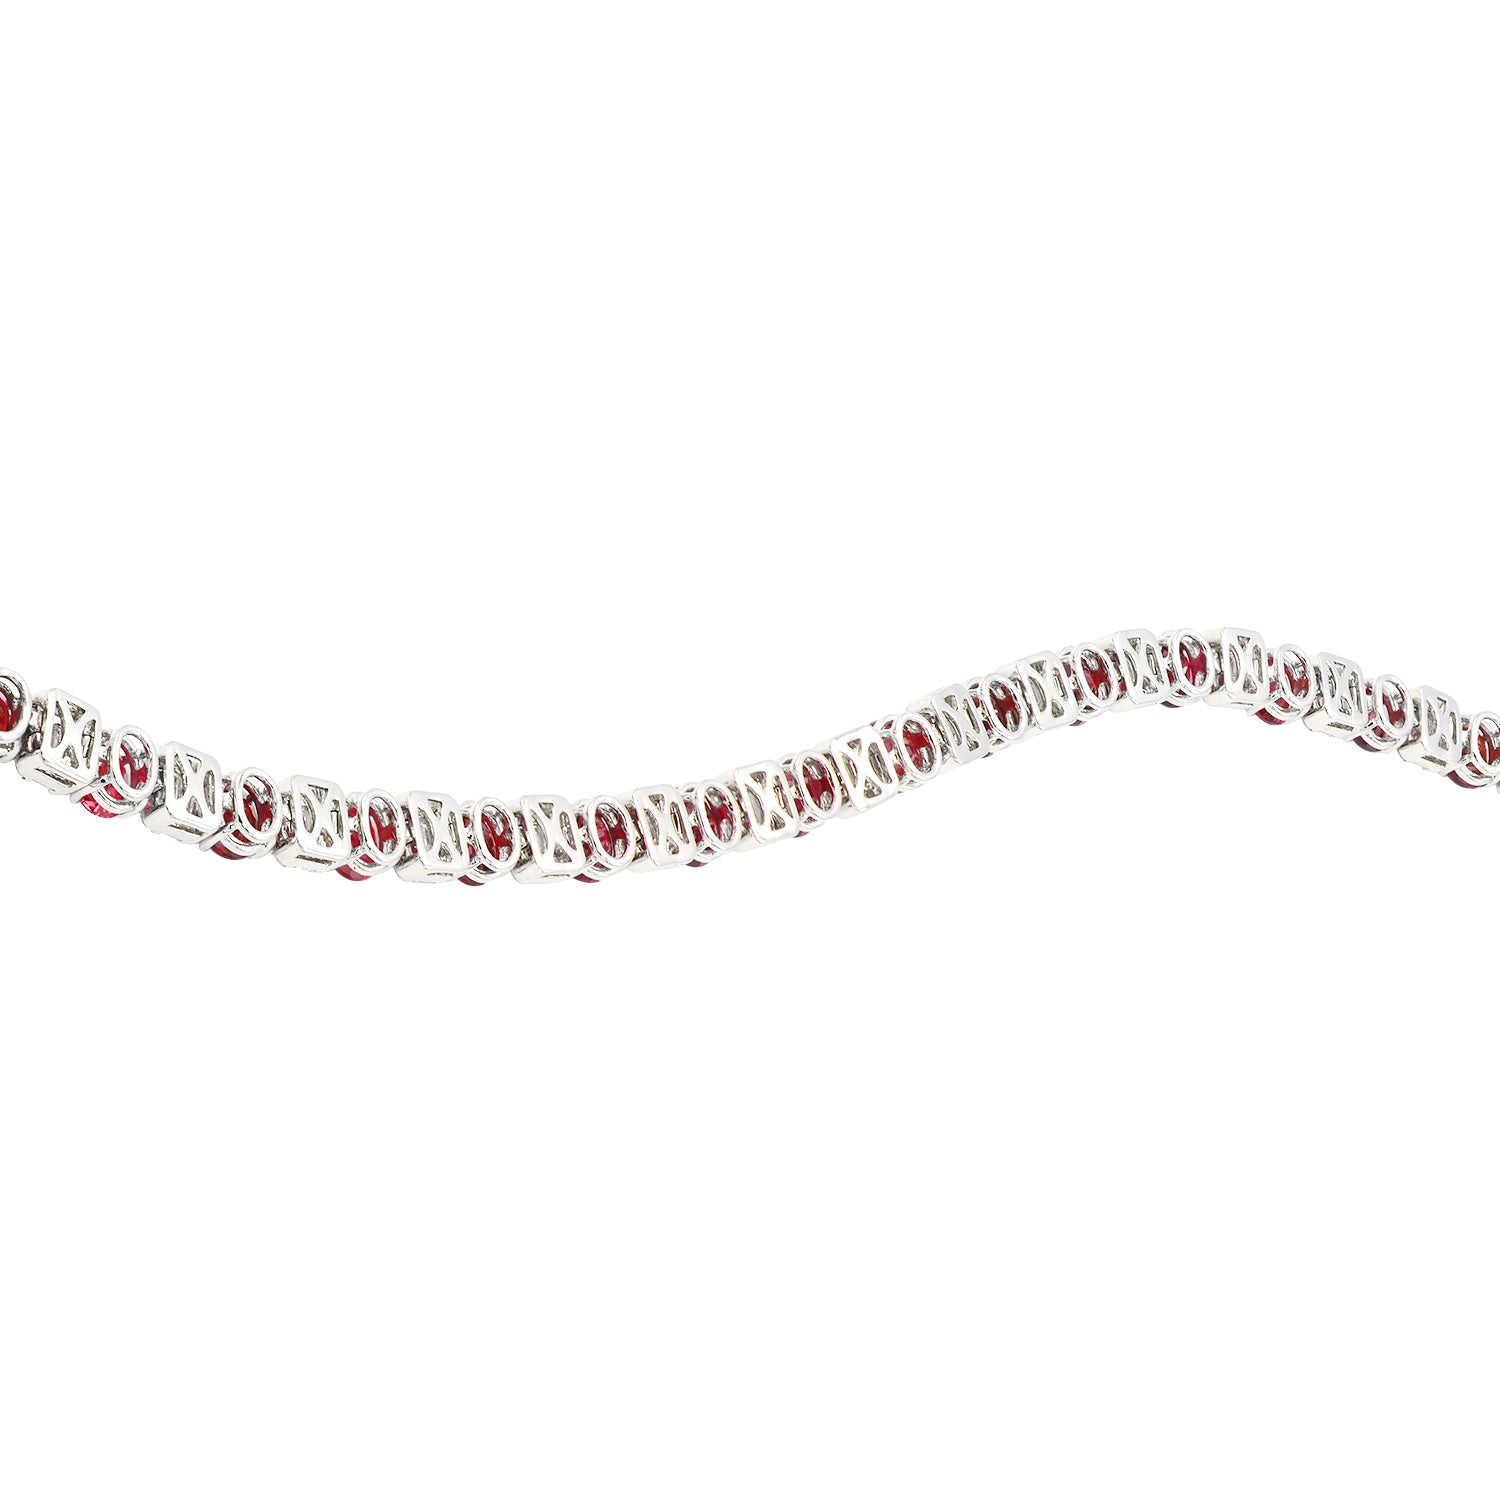 Necklace 18KW/32.3G 49EMER-15.29CT 245BD-6.05CT 196RD-1.10CT